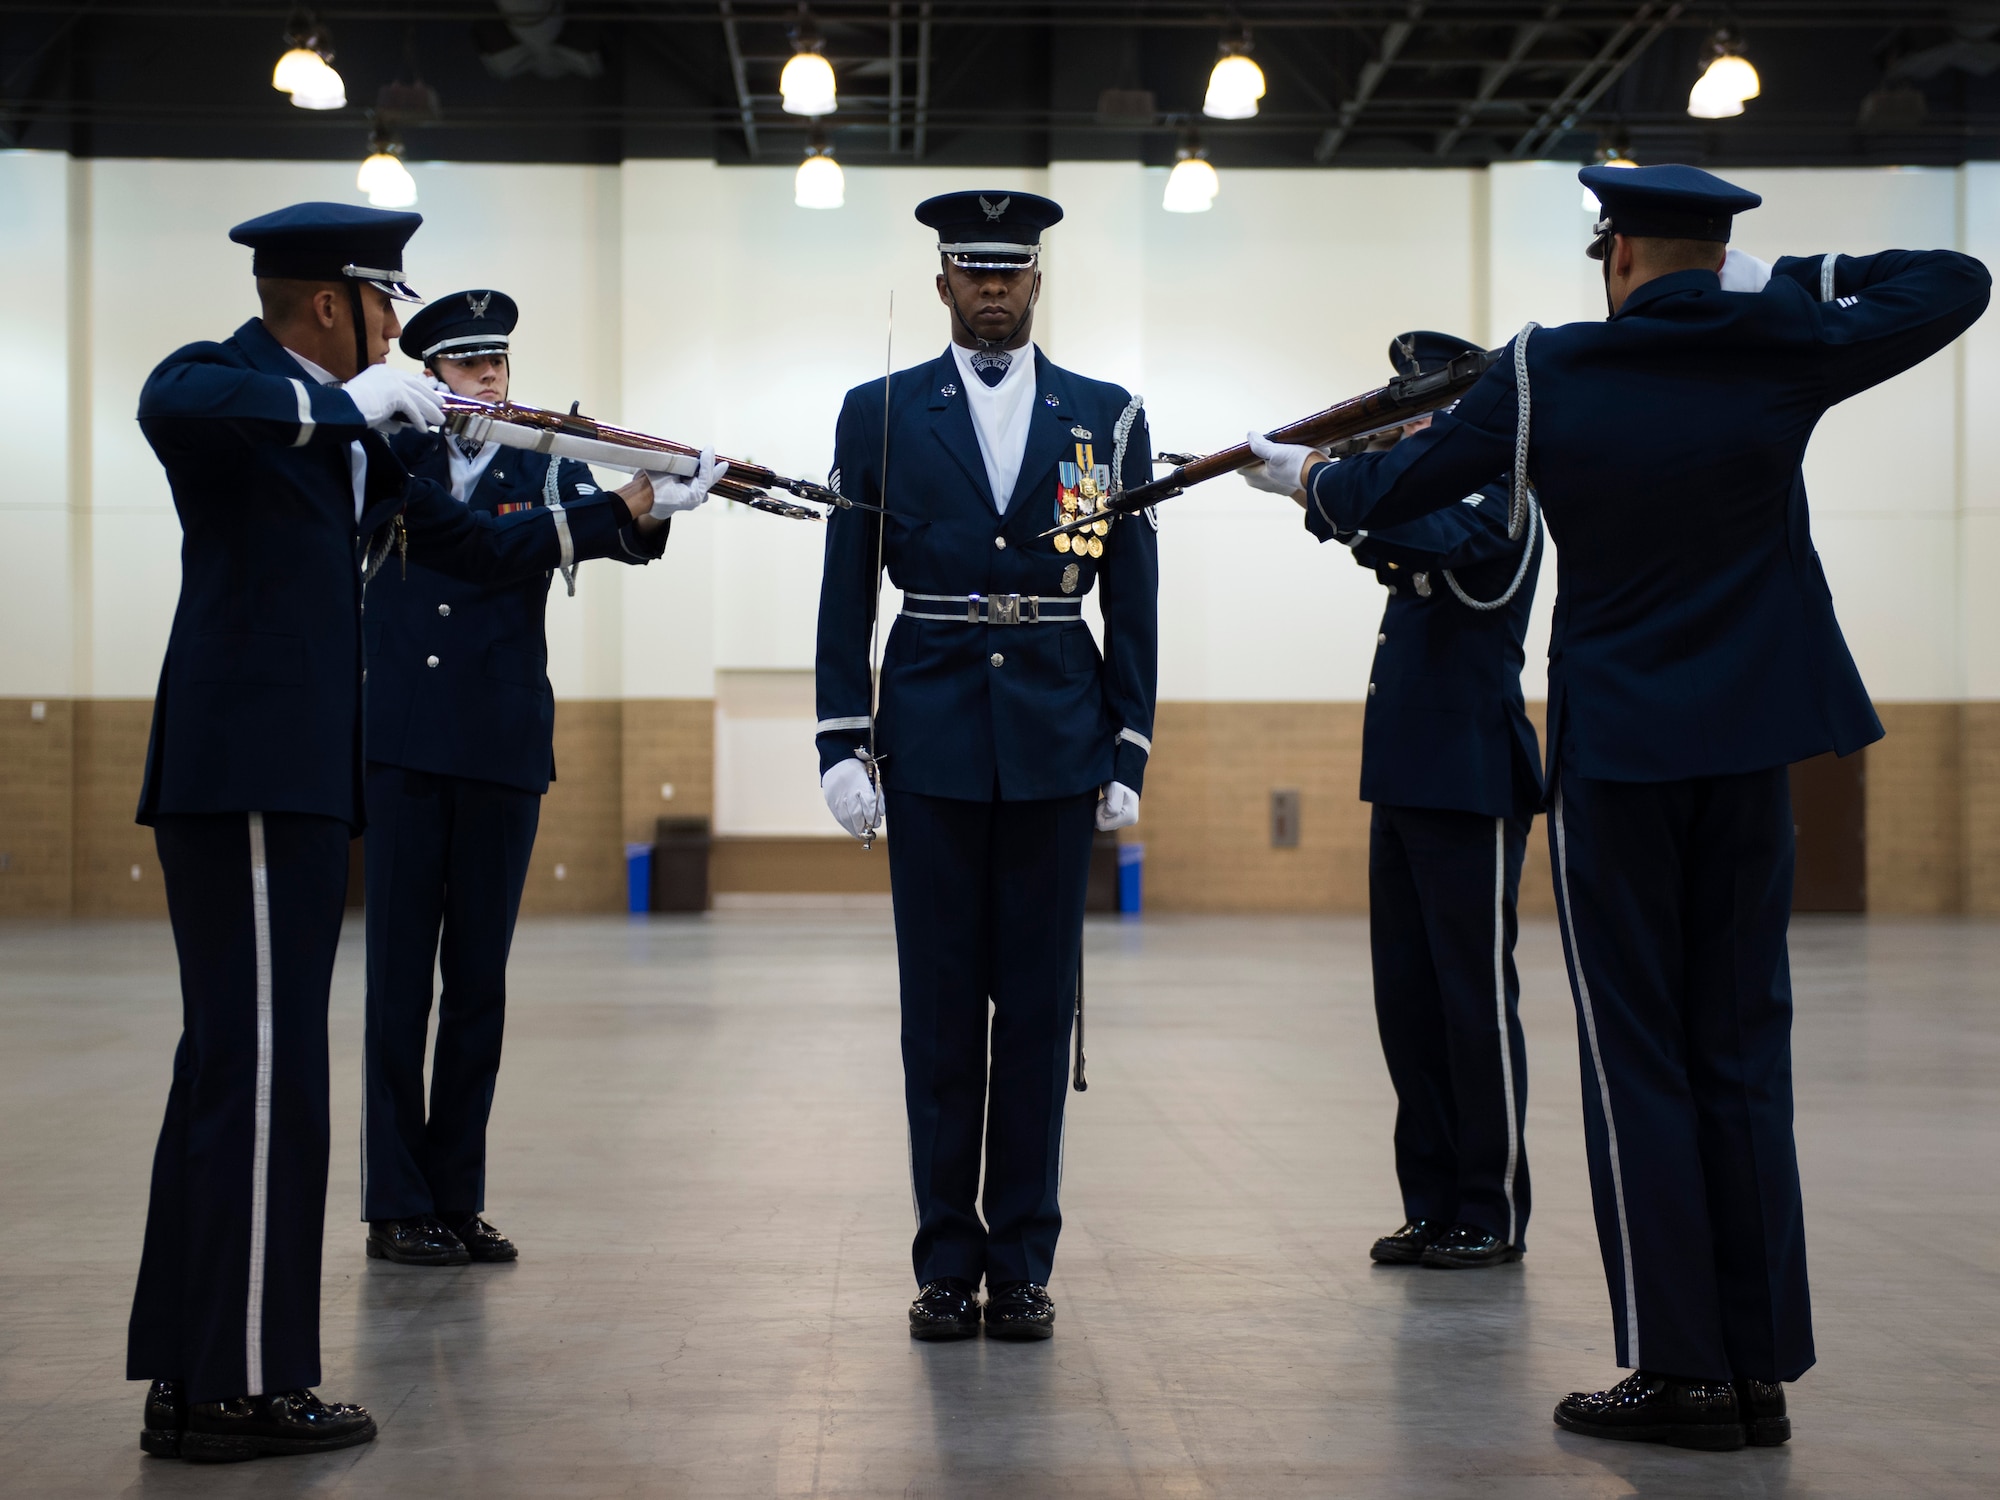 United States Air Force Honor Guard Drill Team performances feature a professionally choreographed sequence of show-stopping weapon maneuvers, precise tosses, complex weapon exchanges, and a walk through the gauntlet of spinning weapons. The Drill Team members perform over 100 times a year at various venues all over the world. (U.S. Air Force Photos/Senior Airman Philip Bryant)